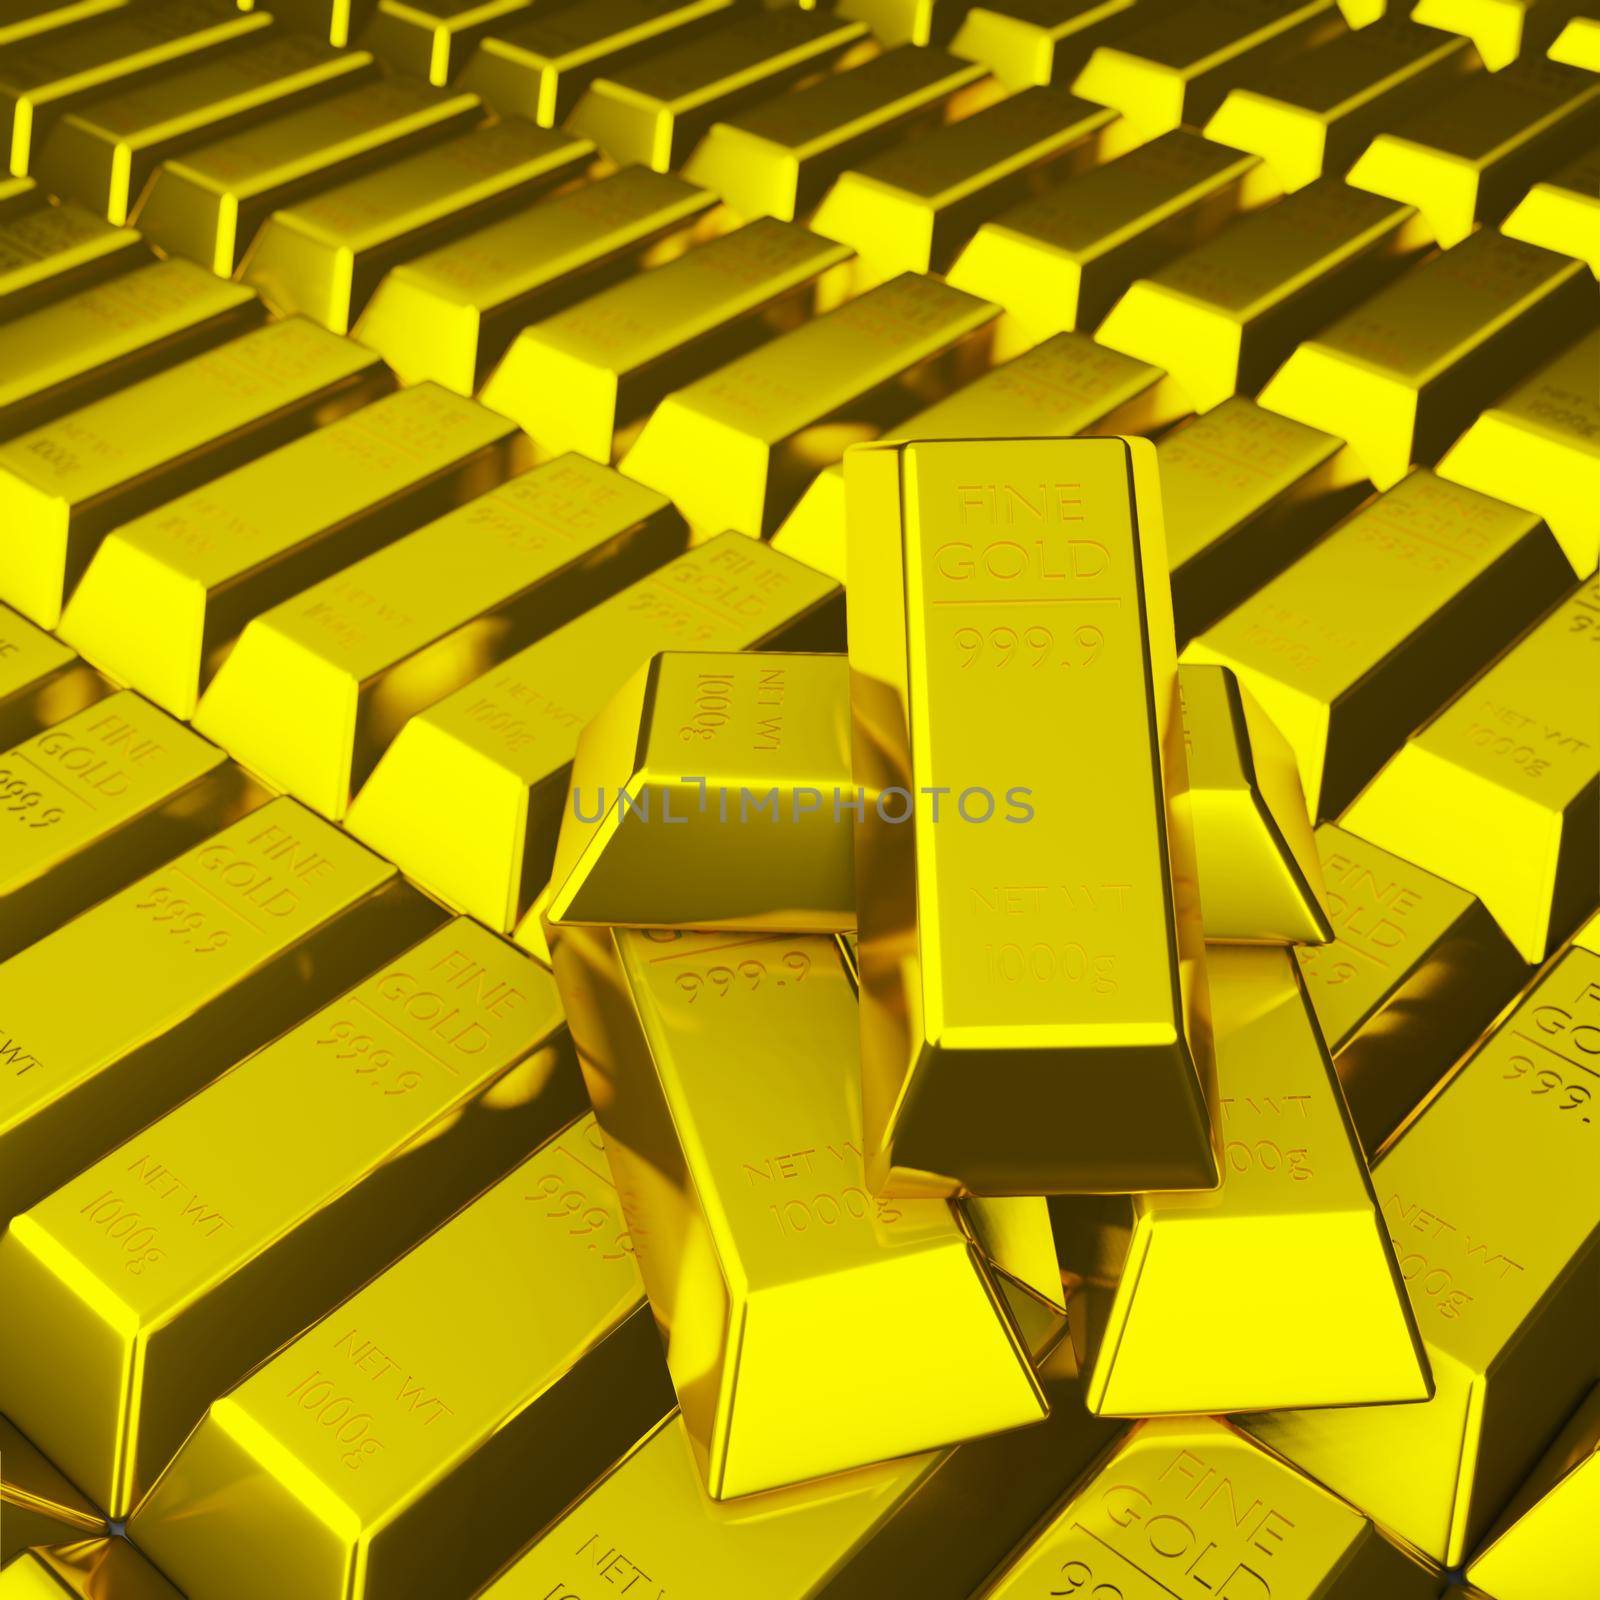 Pile of fine gold bar 999.9 g place on stack of golden bar as background 3d render and copy space. Financial wealth concept illustration.